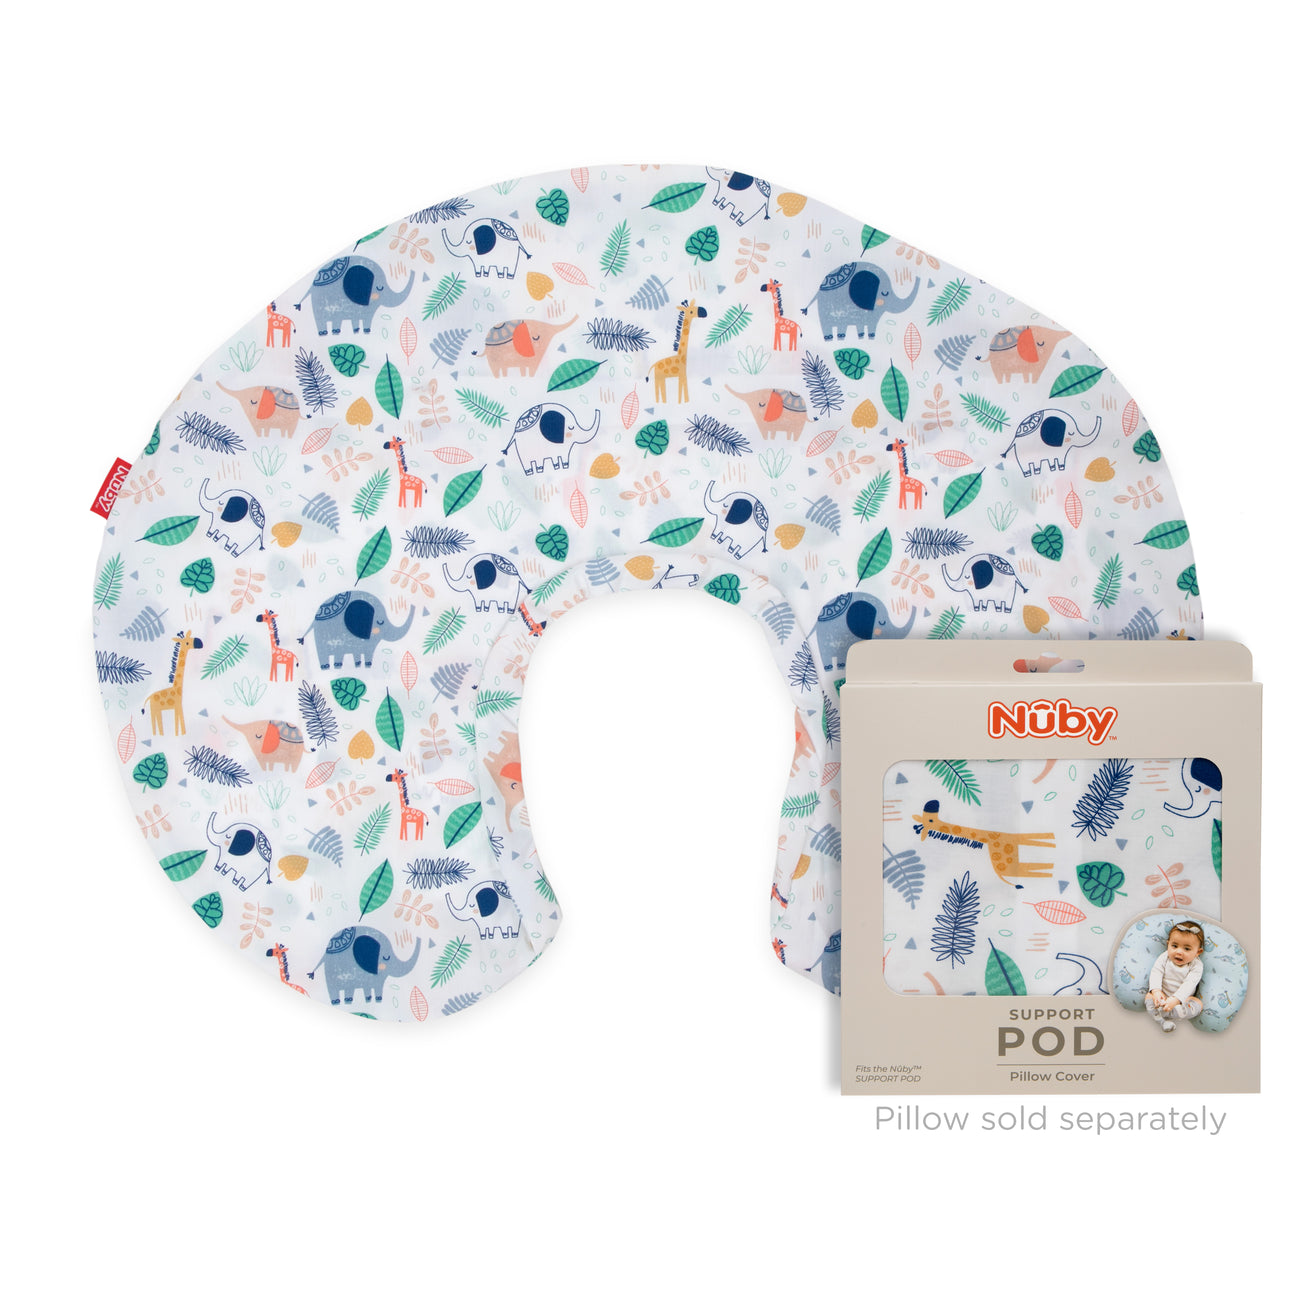 Support Pod Pillow Cover - Nuby US